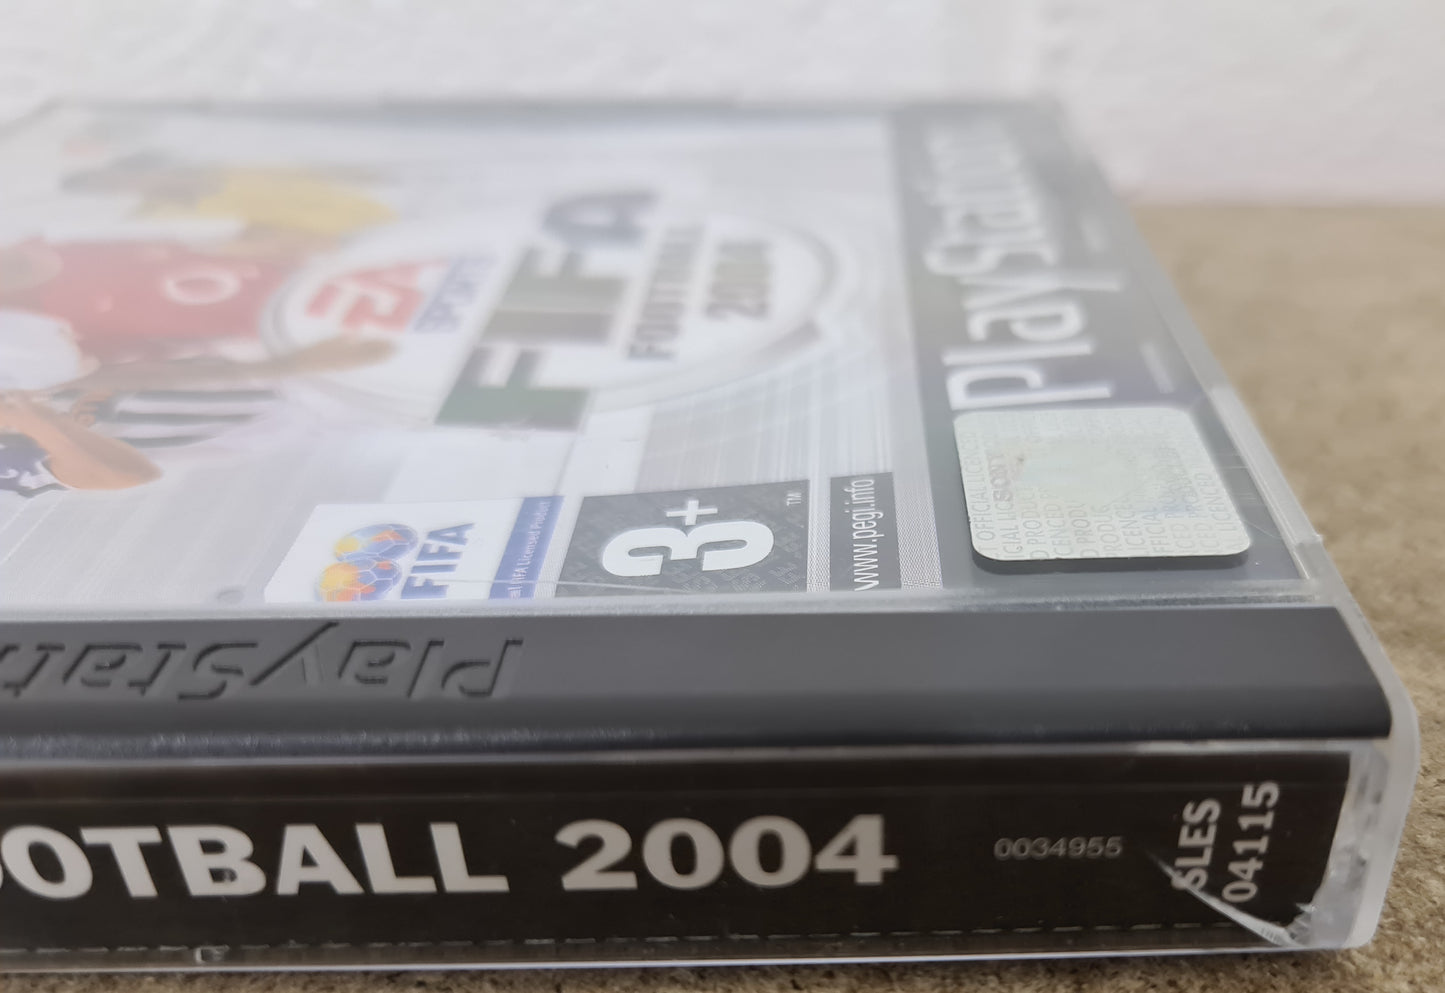 Fifa 2004 Sony Playstation 1 (PS1) Game